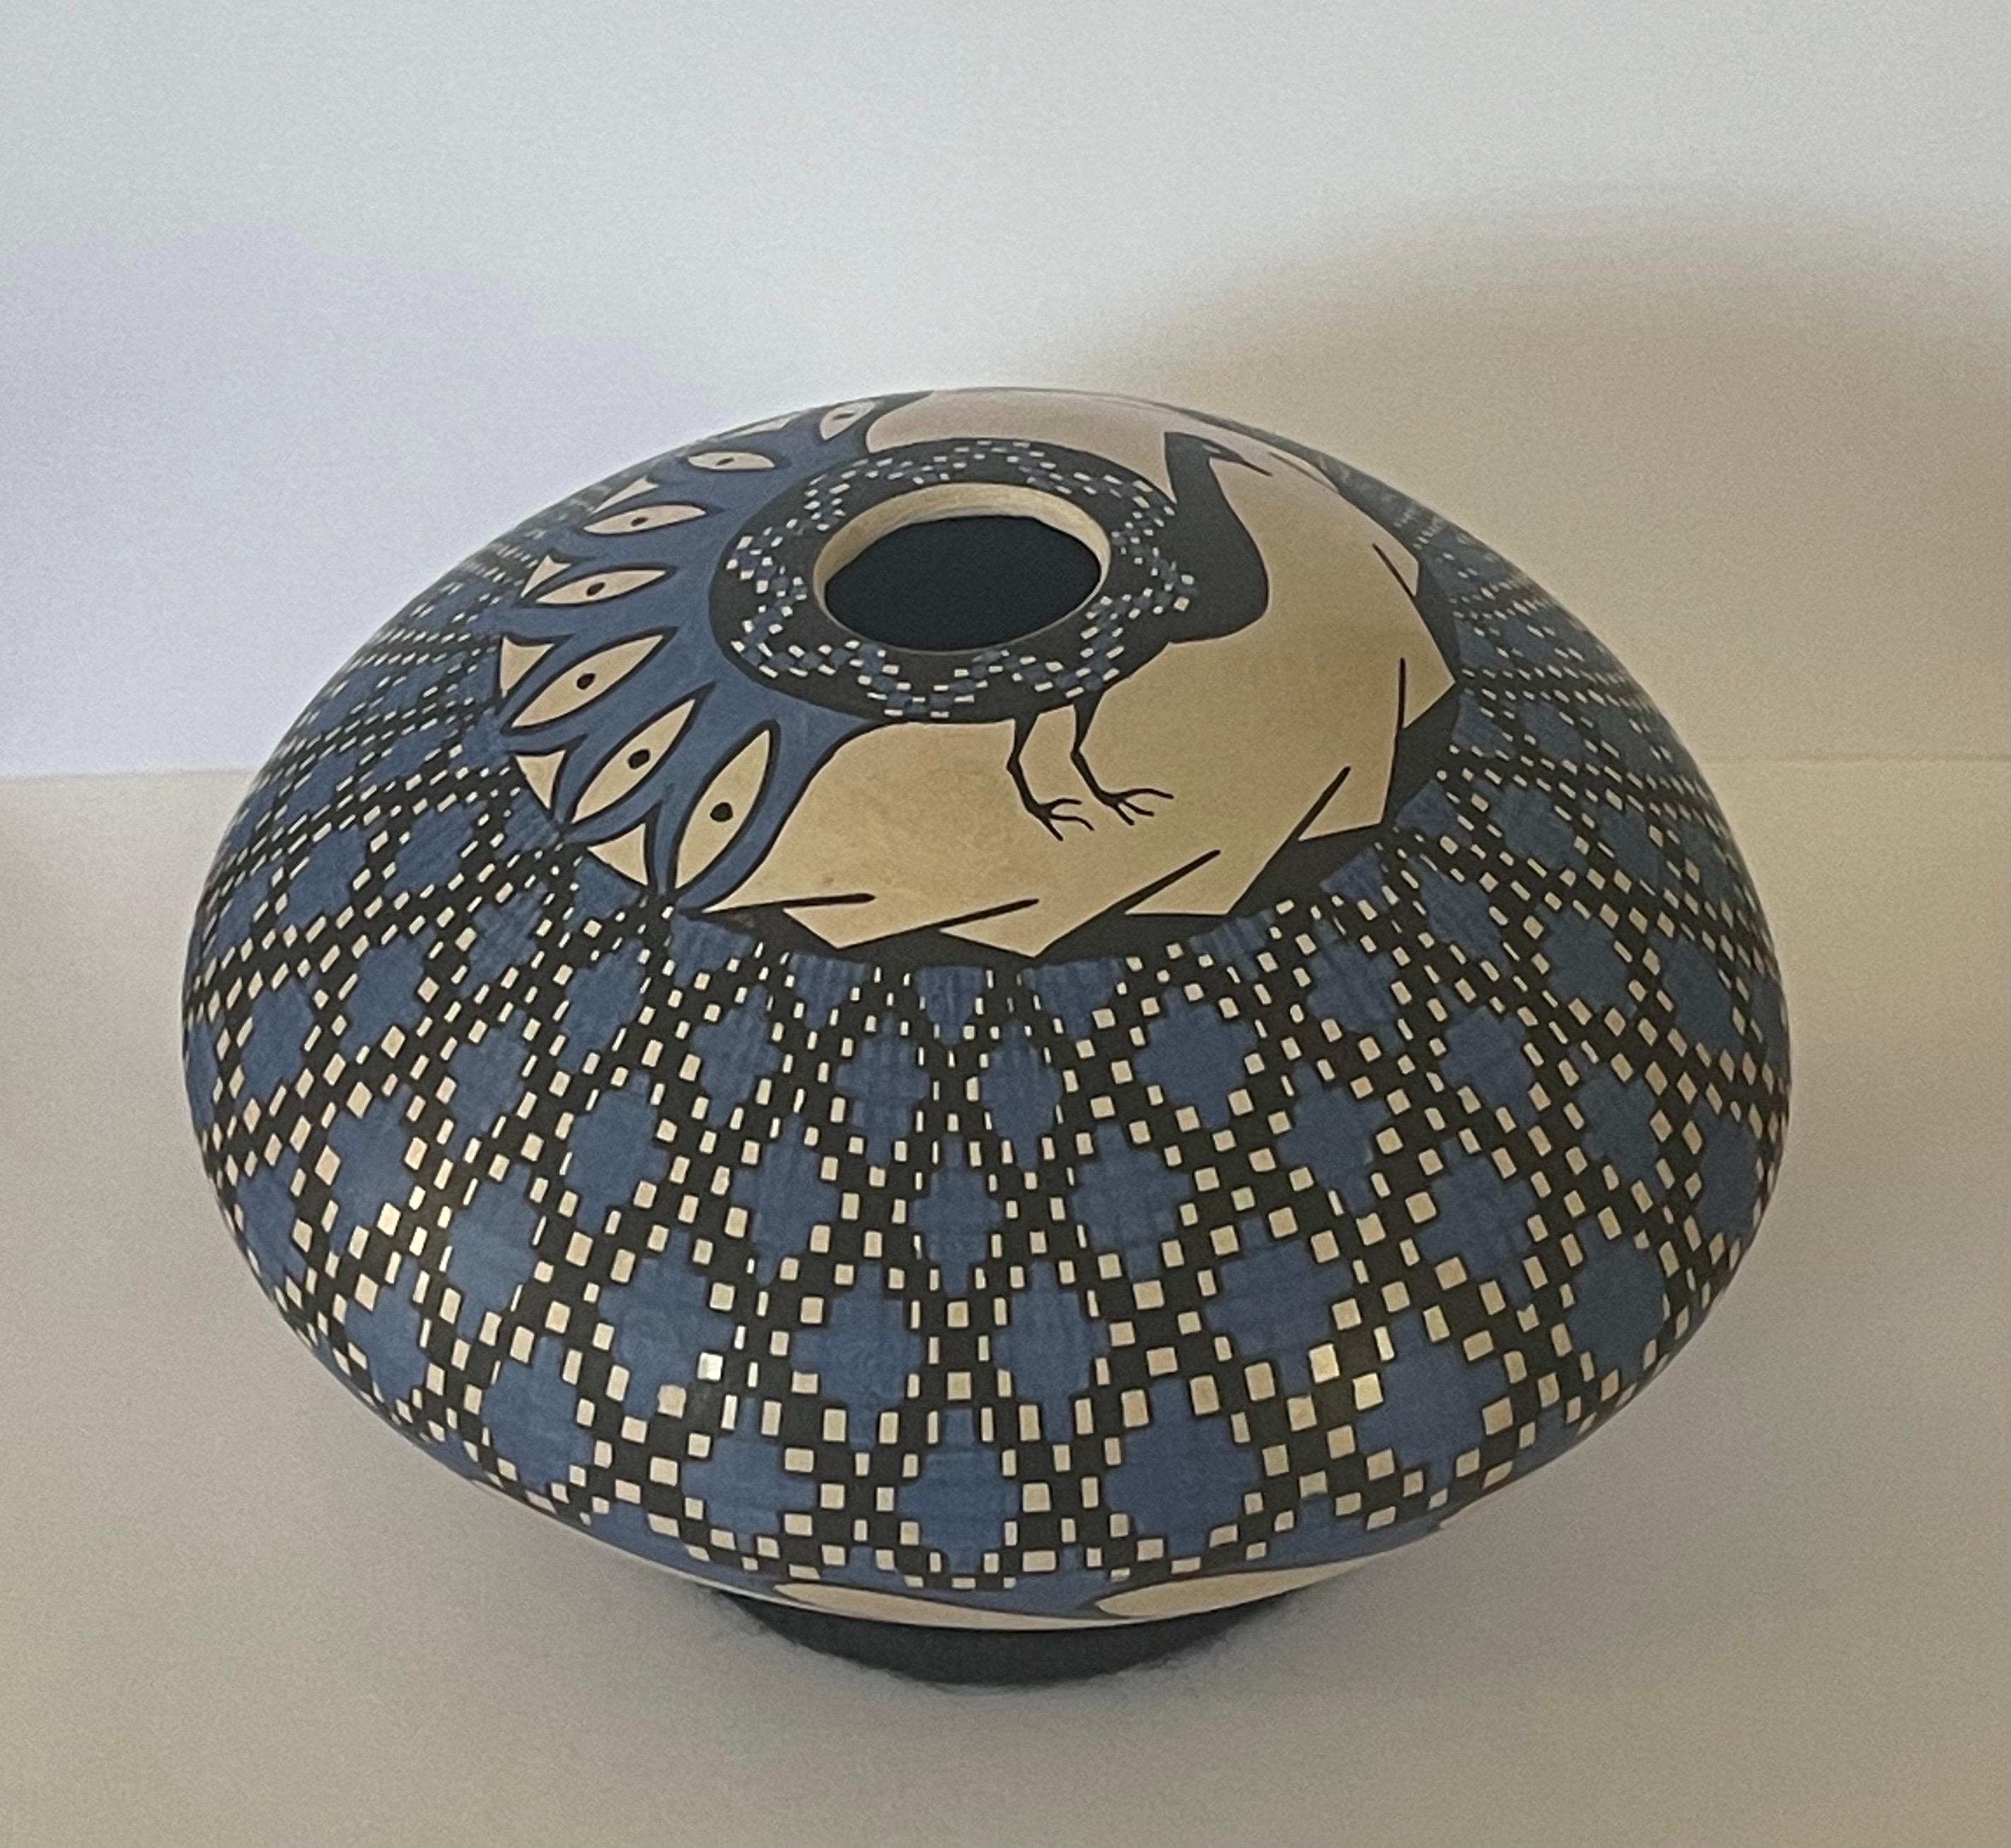 Beautiful hand-turned polychrome Mata Ortiz geometric vase by Emila Villa, circa 1990s. The vase has a beautiful blue finish woth a peacock as the center piece and measures 5